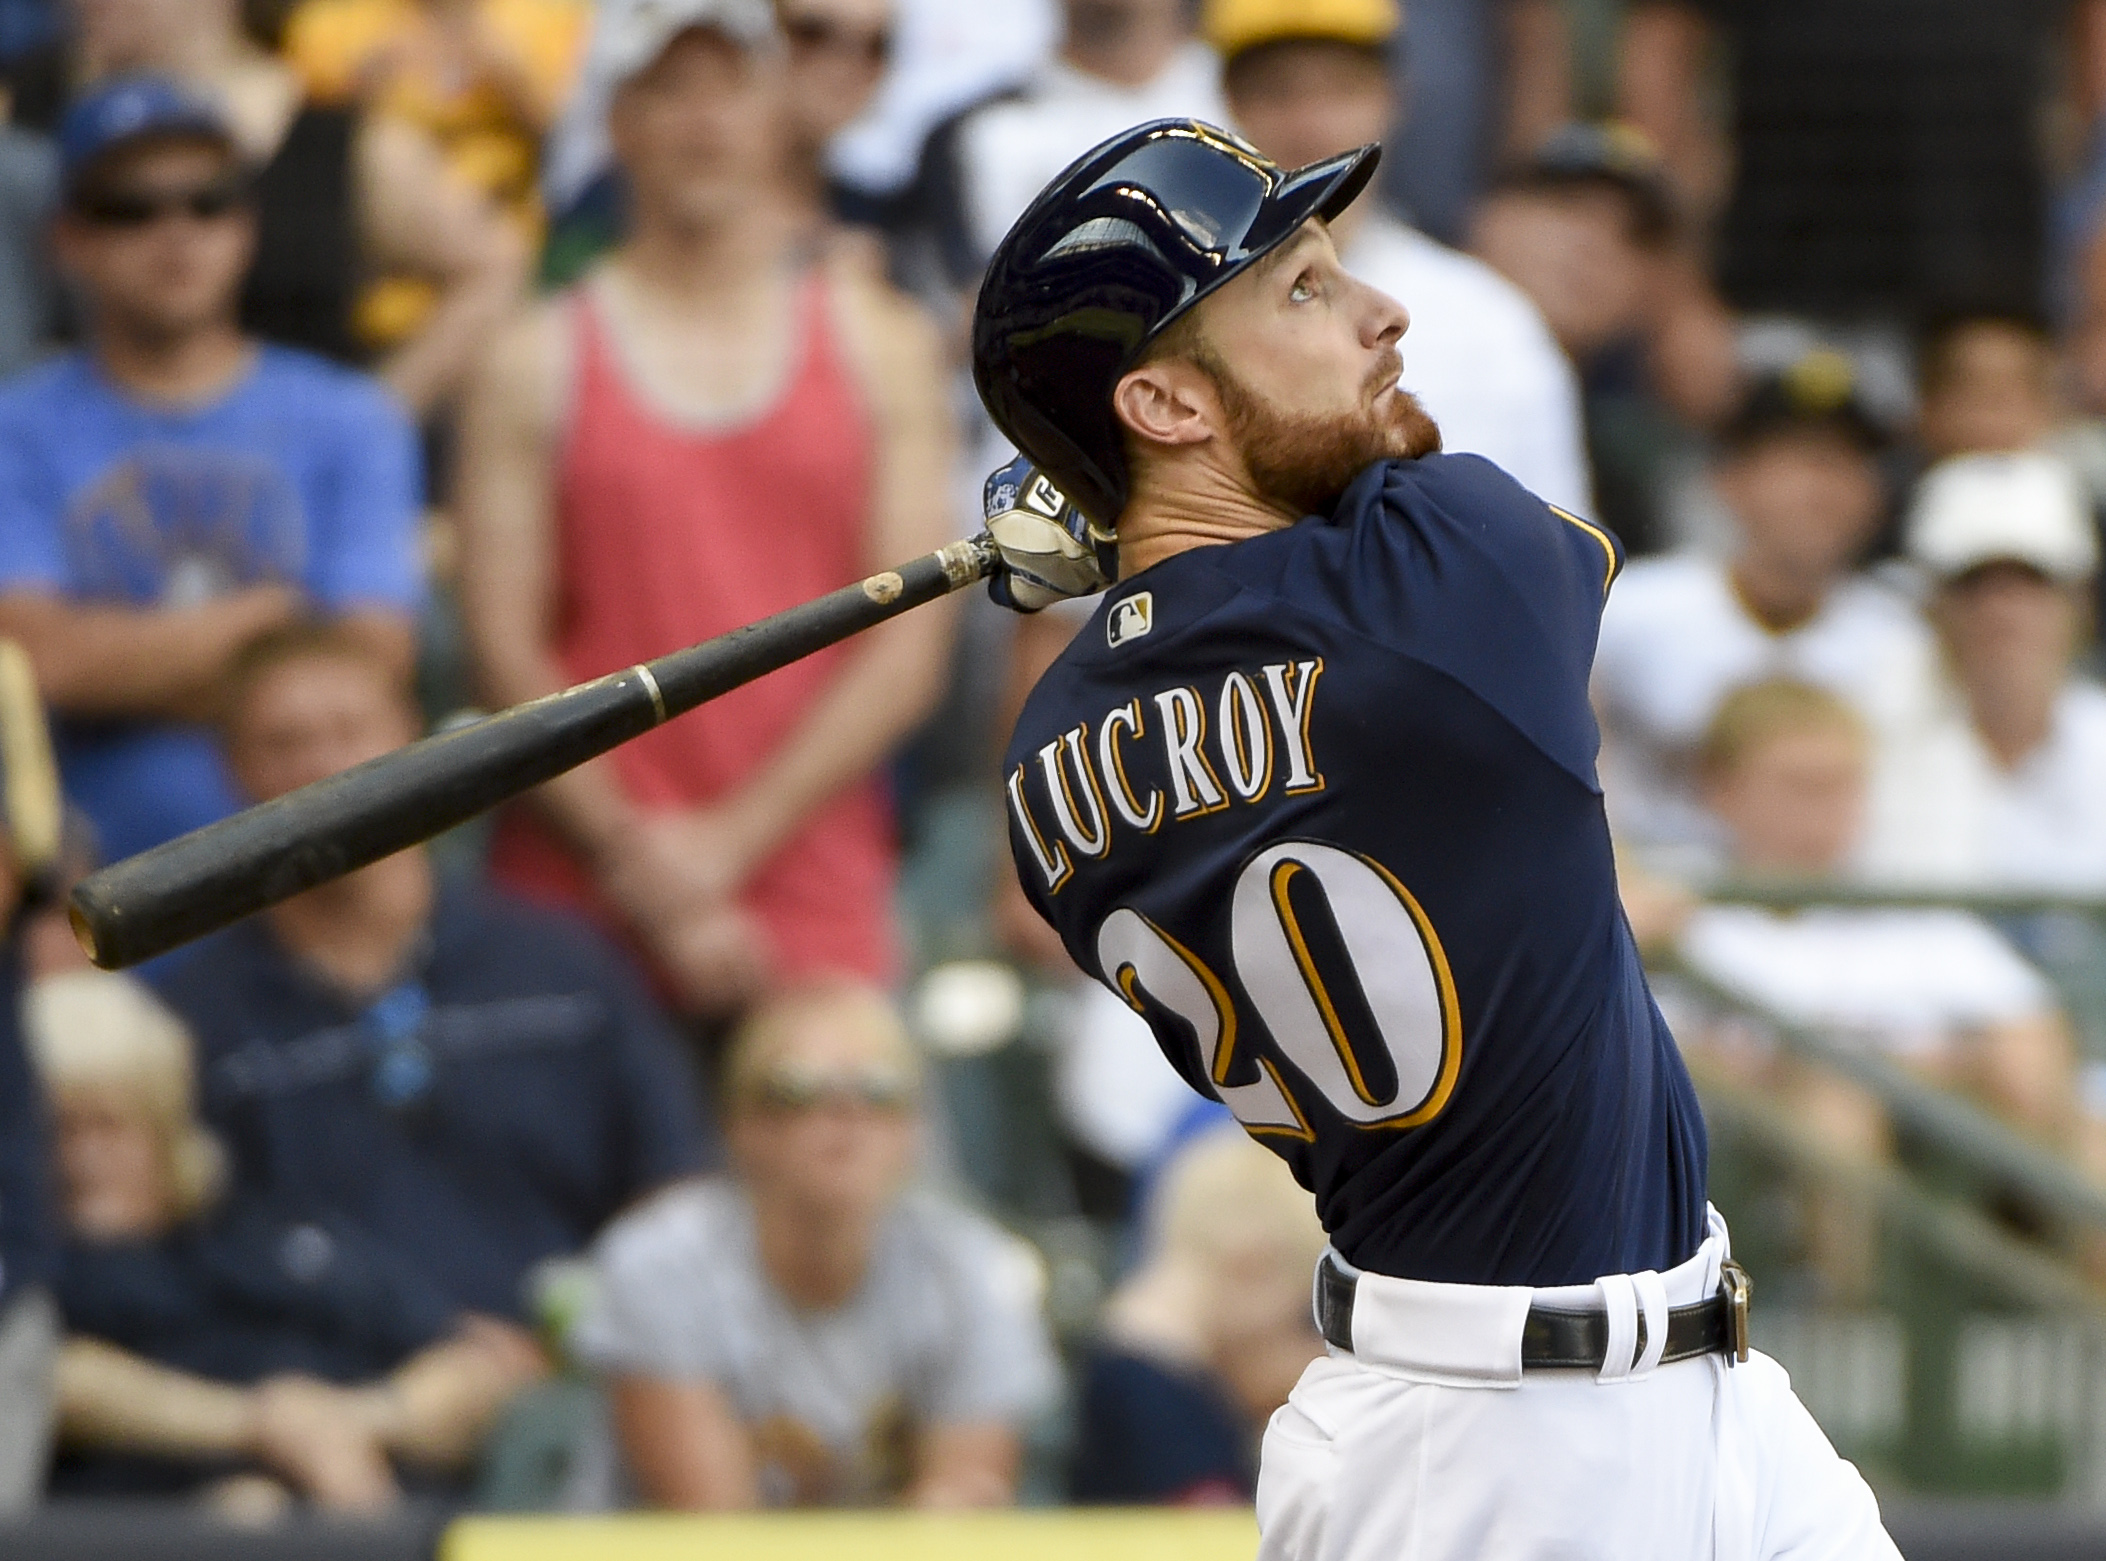 Jonathan Lucroy has usurped Ryan Braun's spot as face of the franchise -  Brew Crew Ball